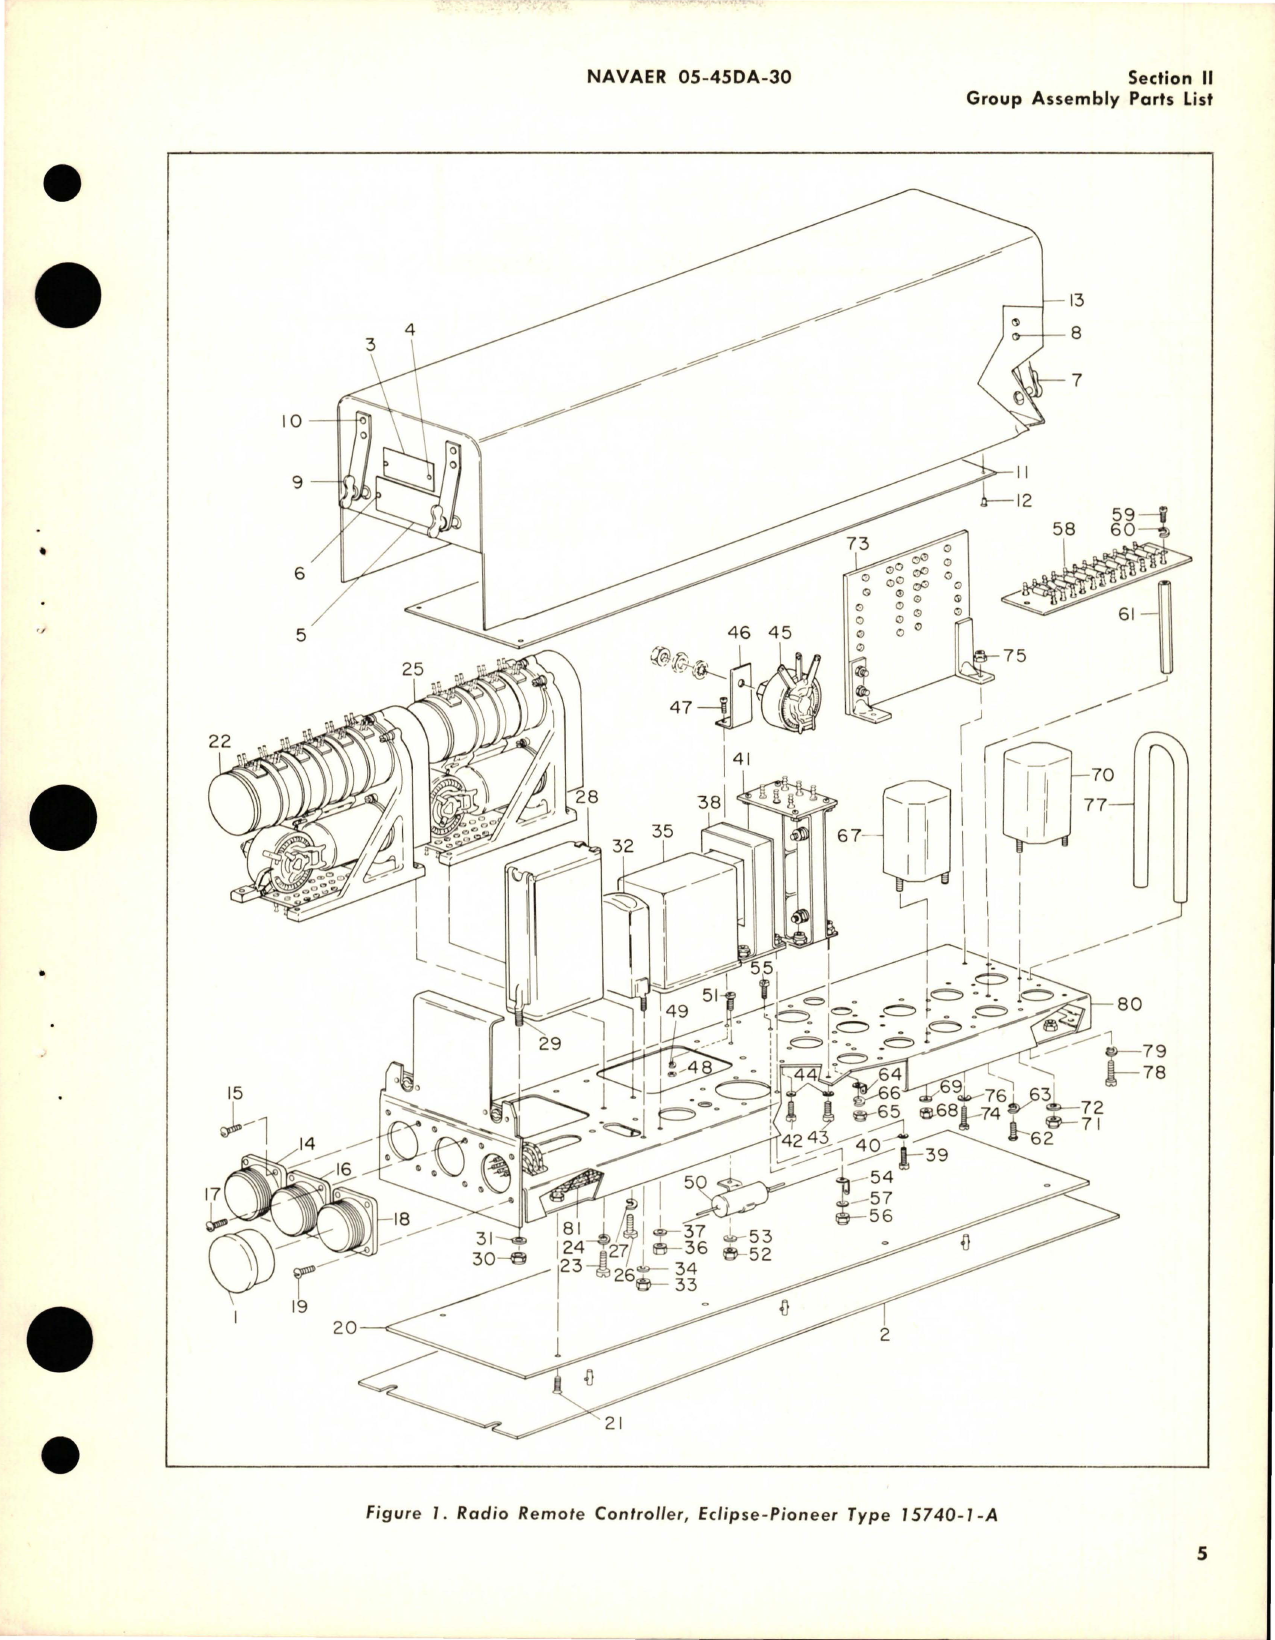 Sample page 9 from AirCorps Library document: Illustrated Parts Breakdown for Radio Remote Controller - Part 15740-1-A